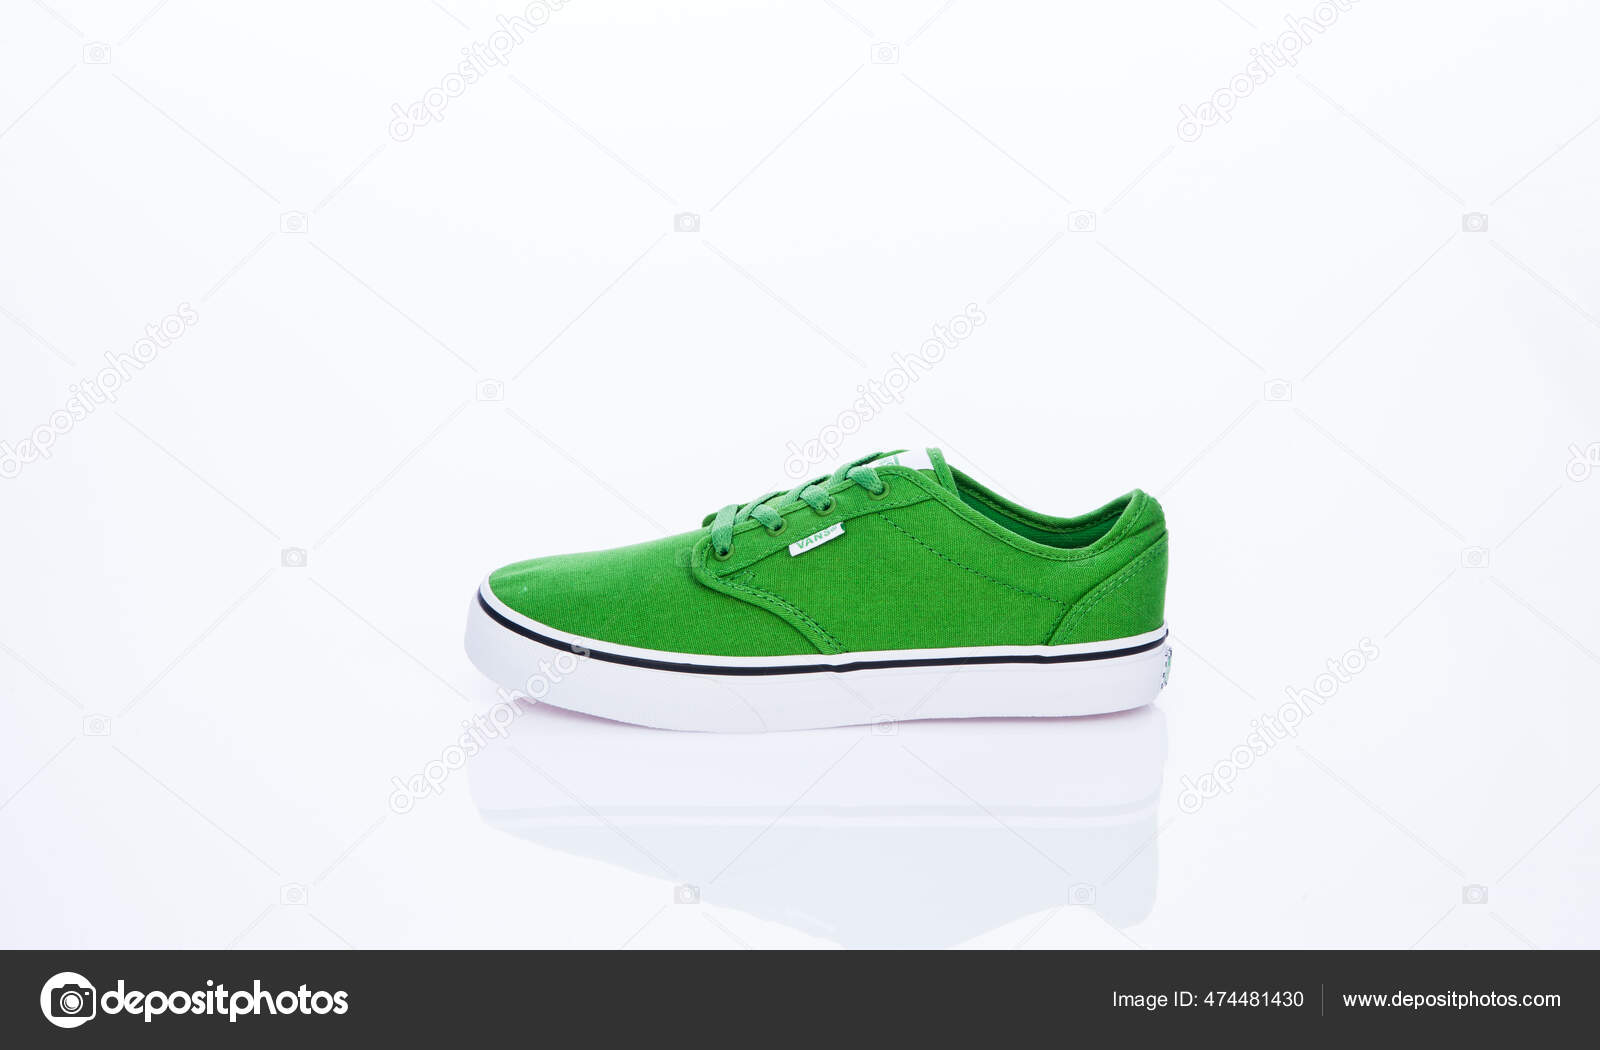 Medellin Colombia May 2021 New Style Vans Shoes Taken – Stock Editorial Photo © JFCFOTOGRAFIC #474481430